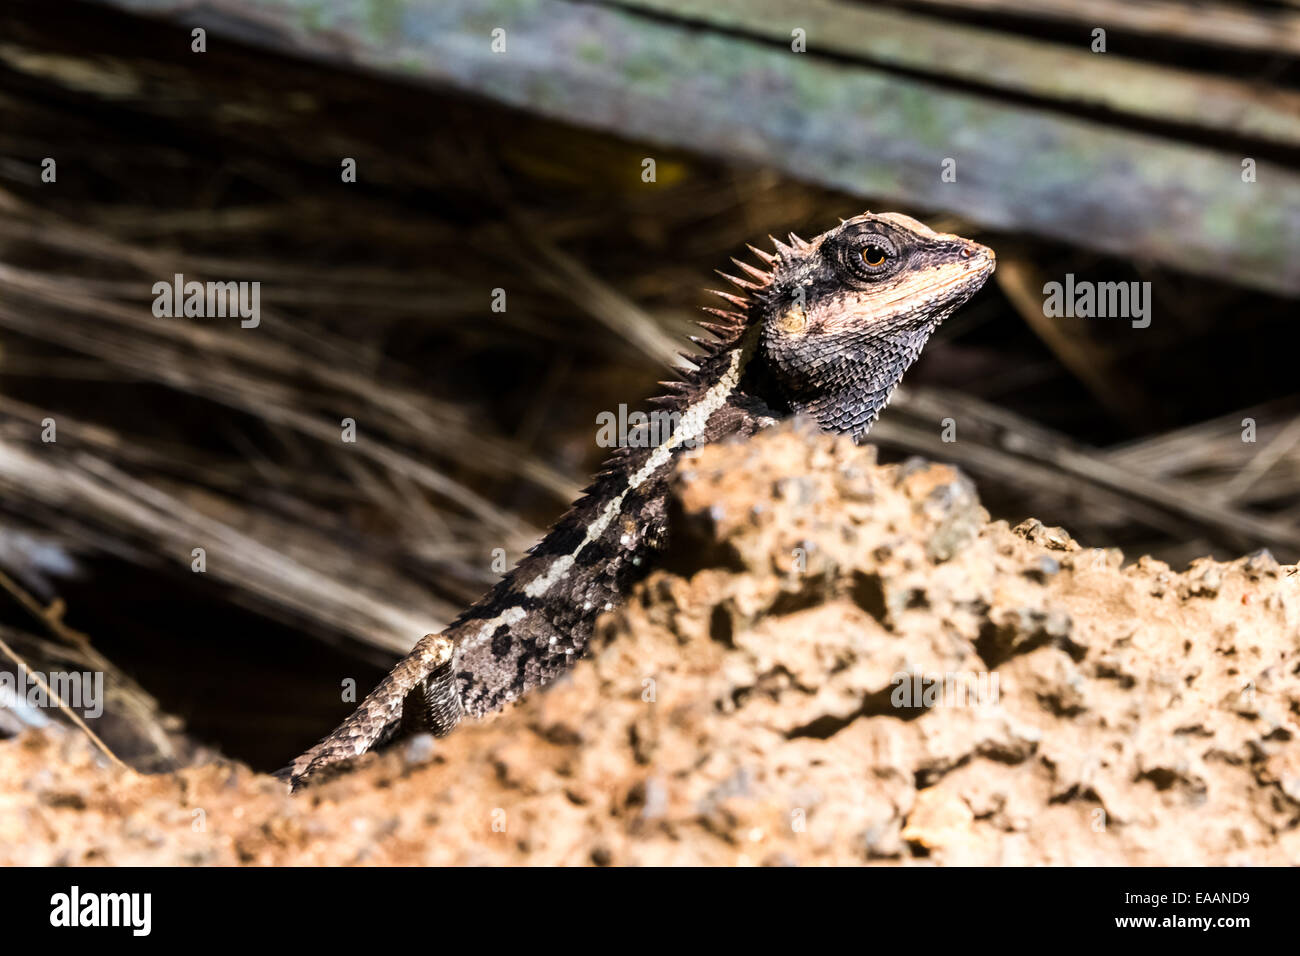 Lizard, reptile sitting on Rock in Thailand Stock Photo